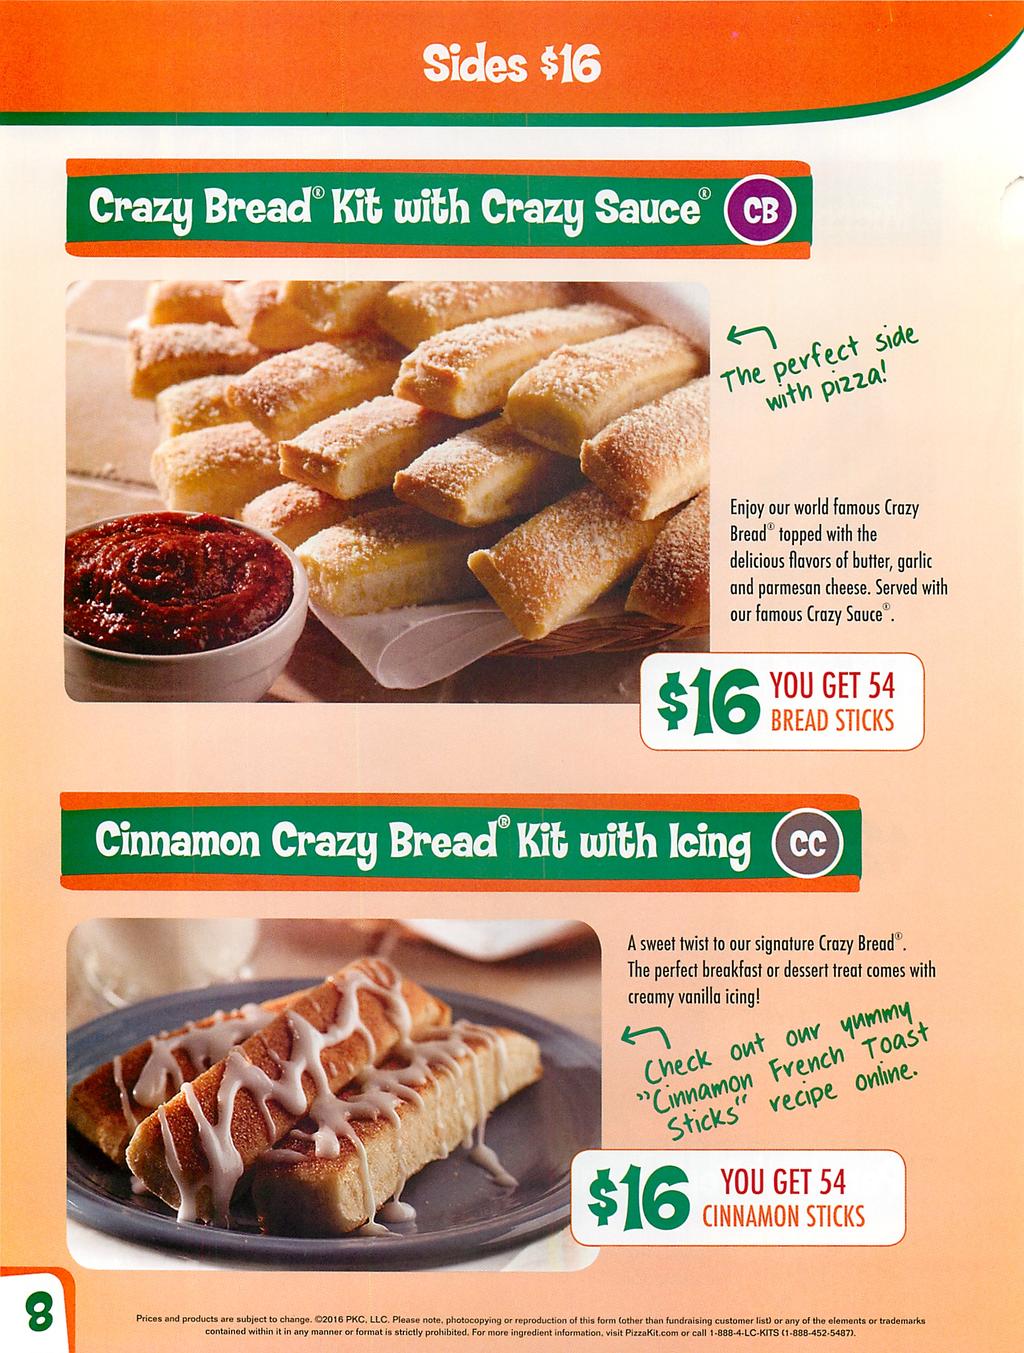 ^ ides $16 Crazy Bread3 Kit with Crazy Sauce0 (cb) *^\ ^& Enjoy our world famous Crazy Bread1 topped with the delicious flavors of butter, garlic and parmesan cheese.